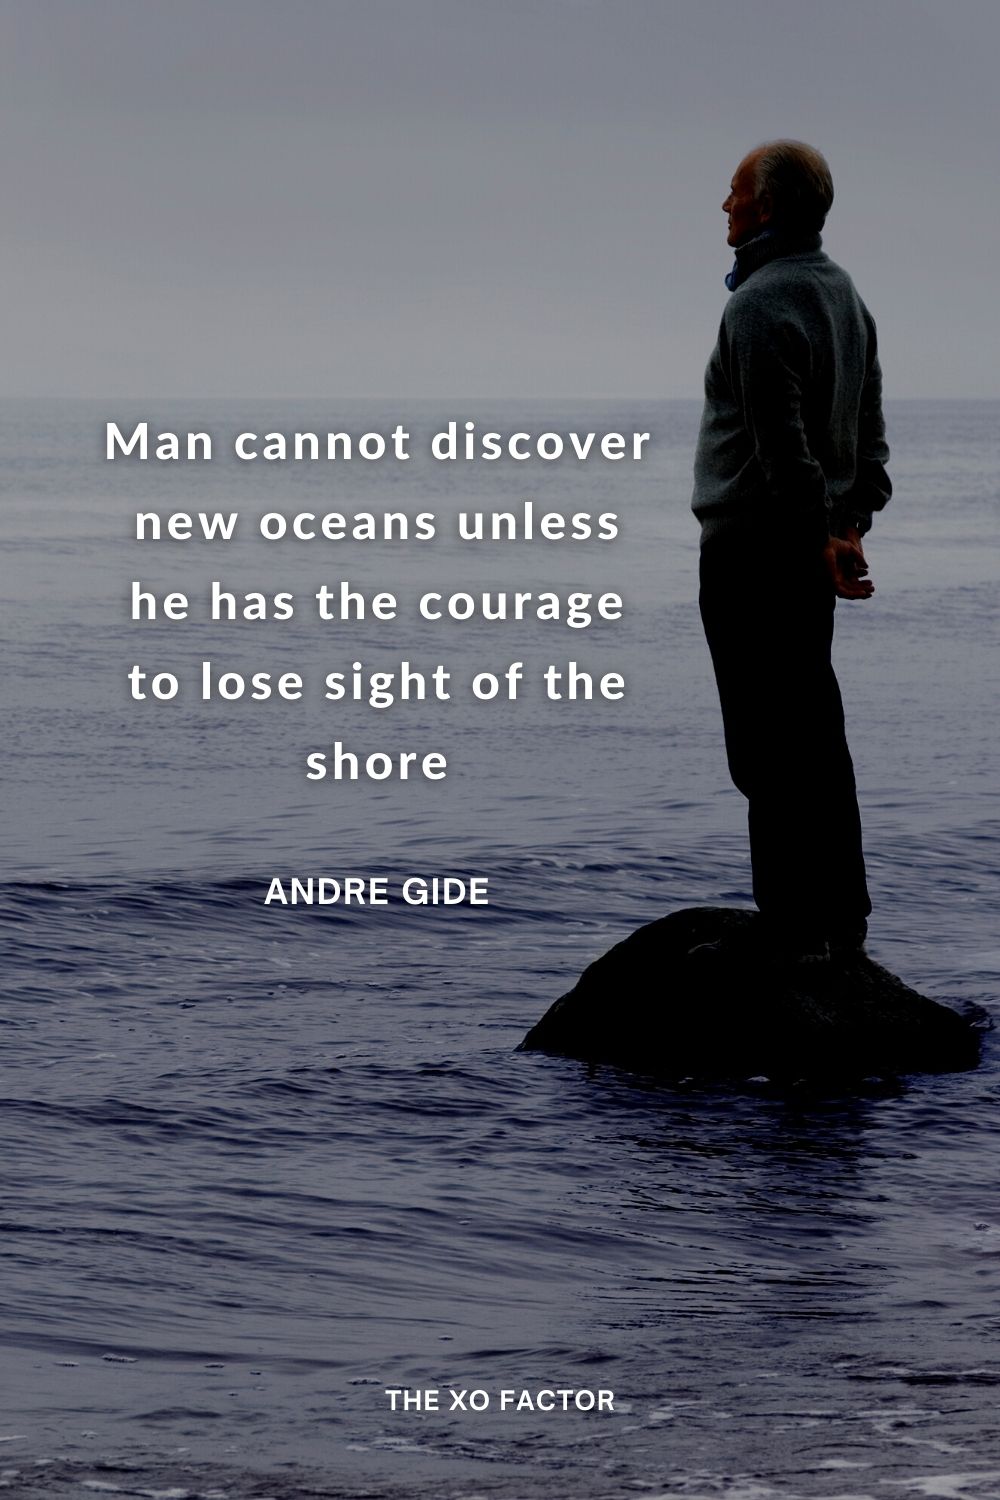 Man cannot discover new oceans unless he has the courage to lose sight of the shore